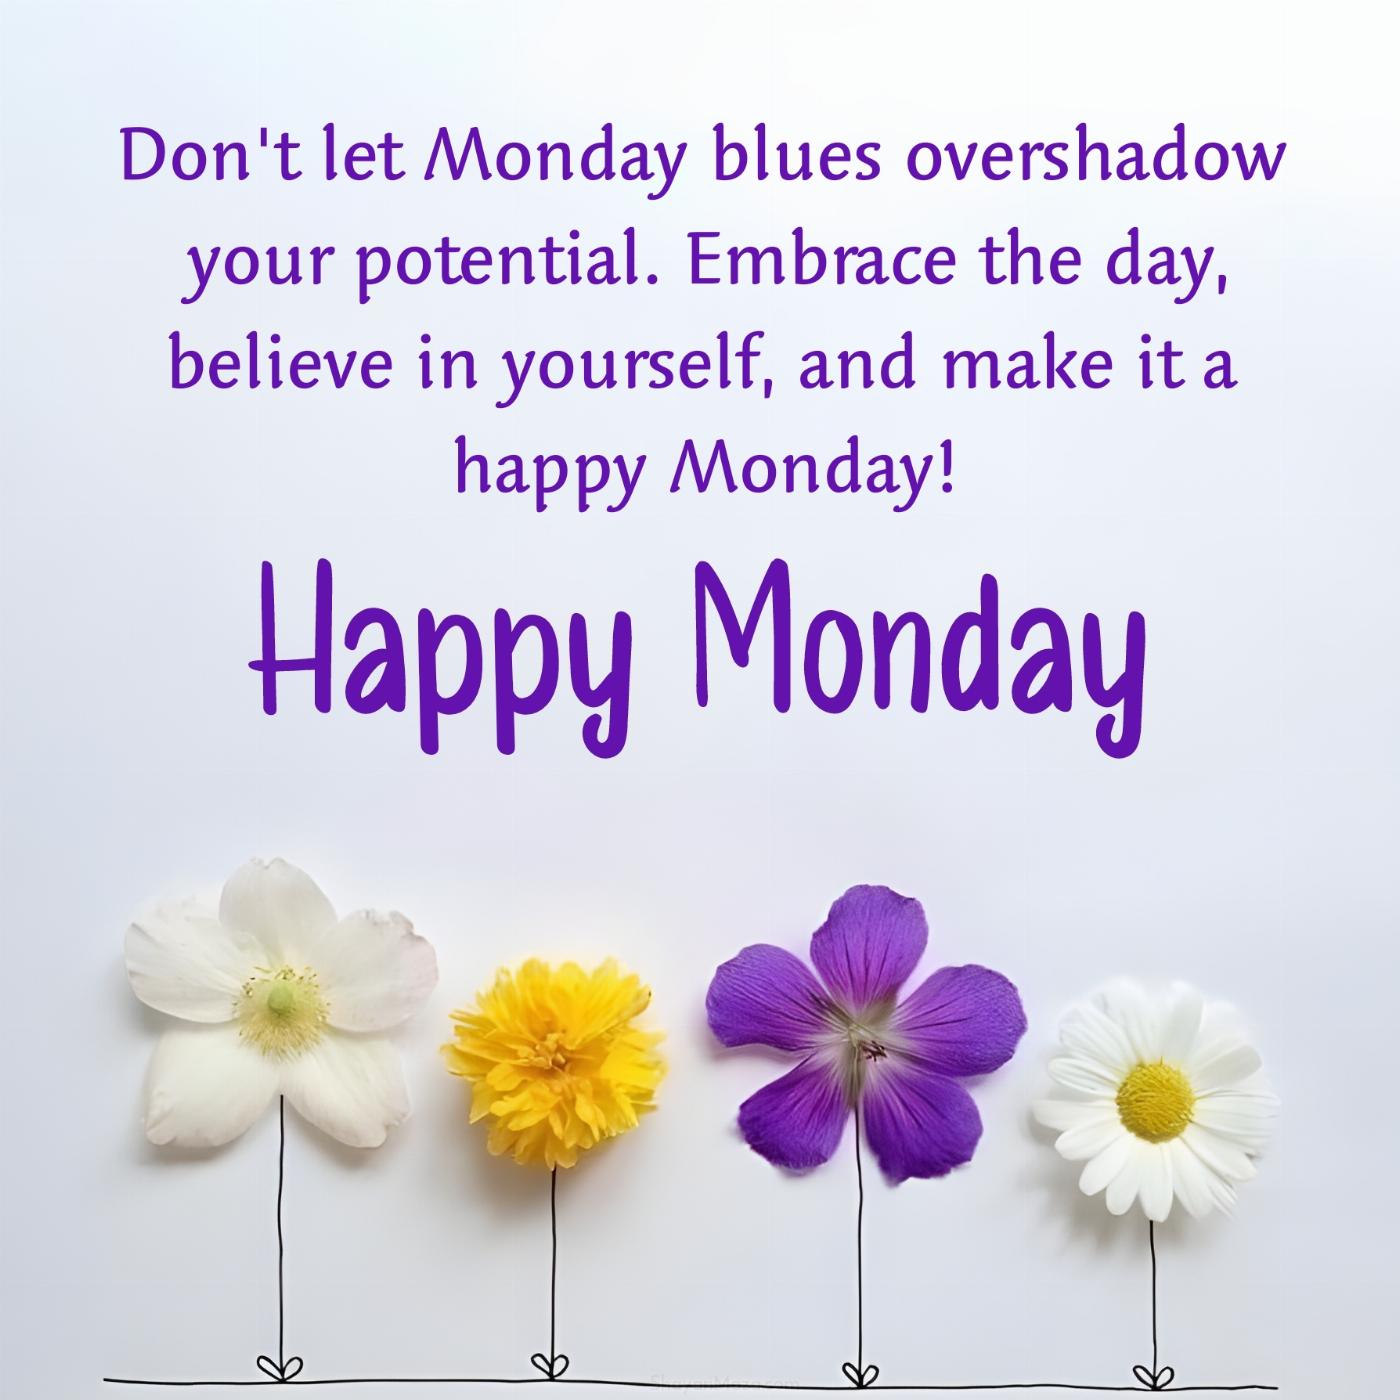 Don't let Monday blues overshadow your potential